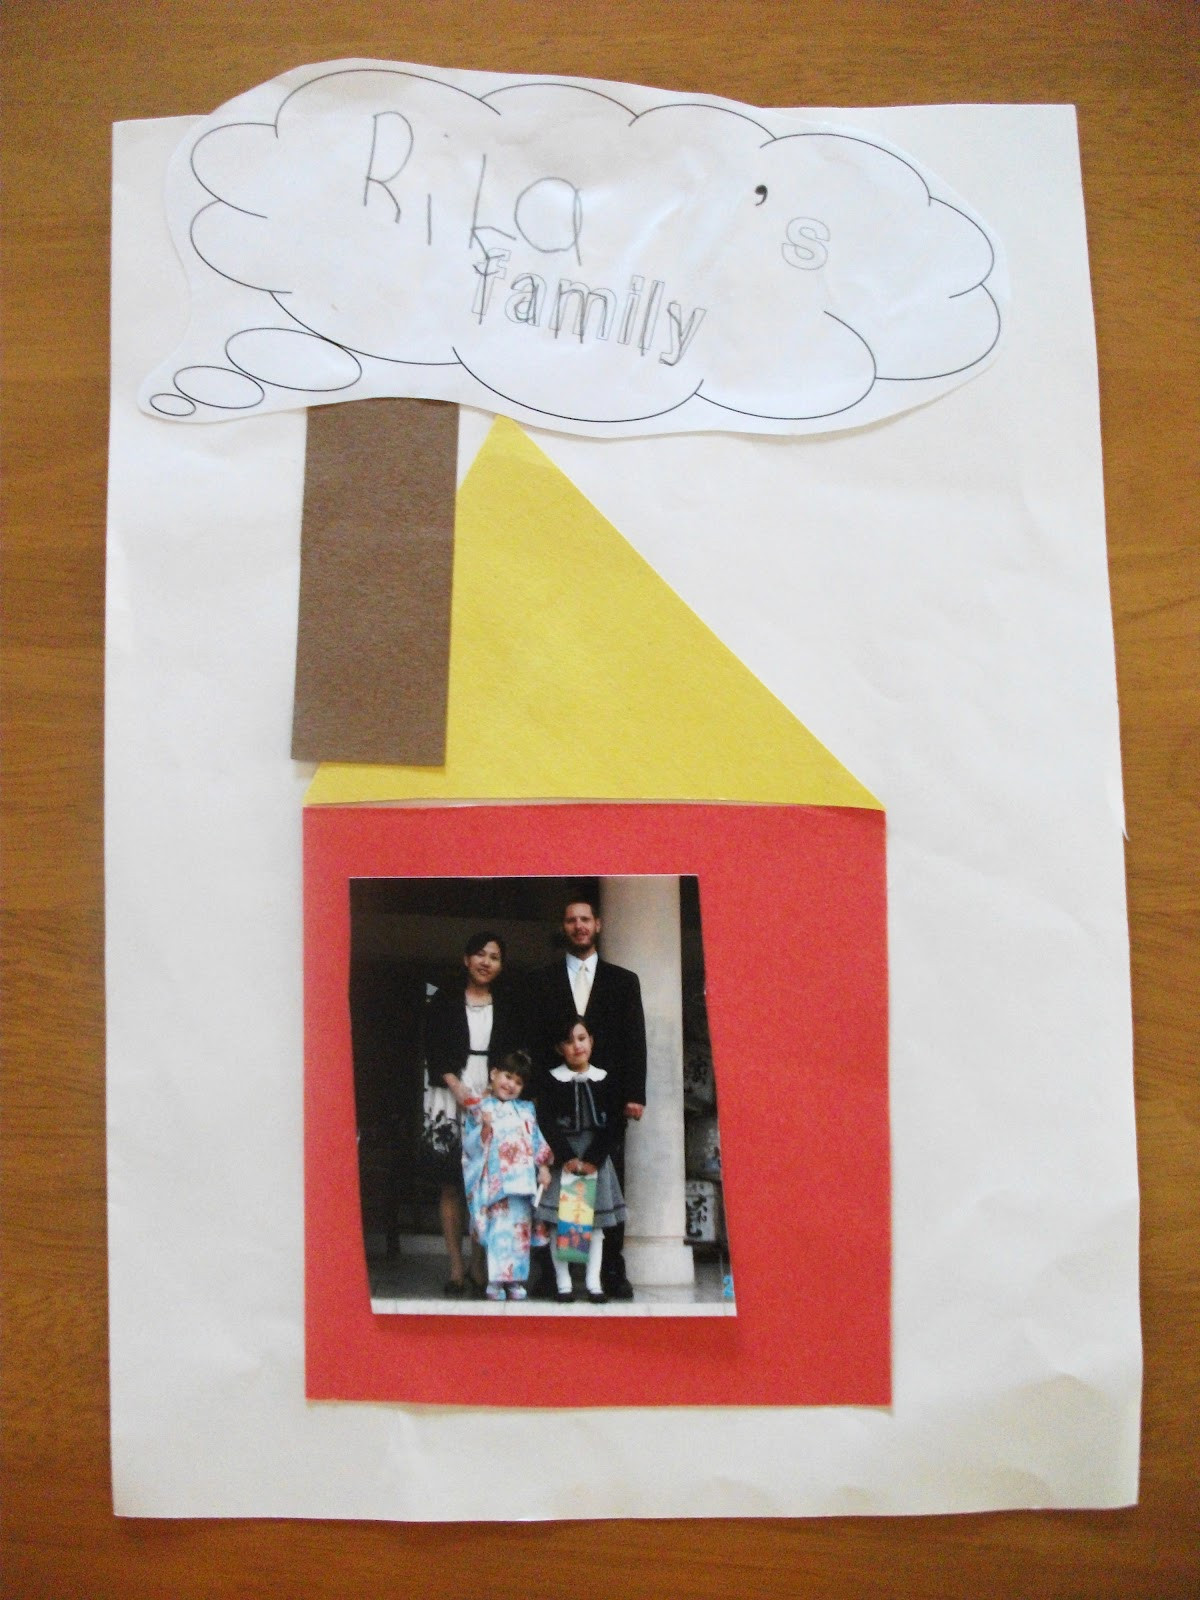 My Family Craft Ideas For Preschool
 My Family Shapes House Craft